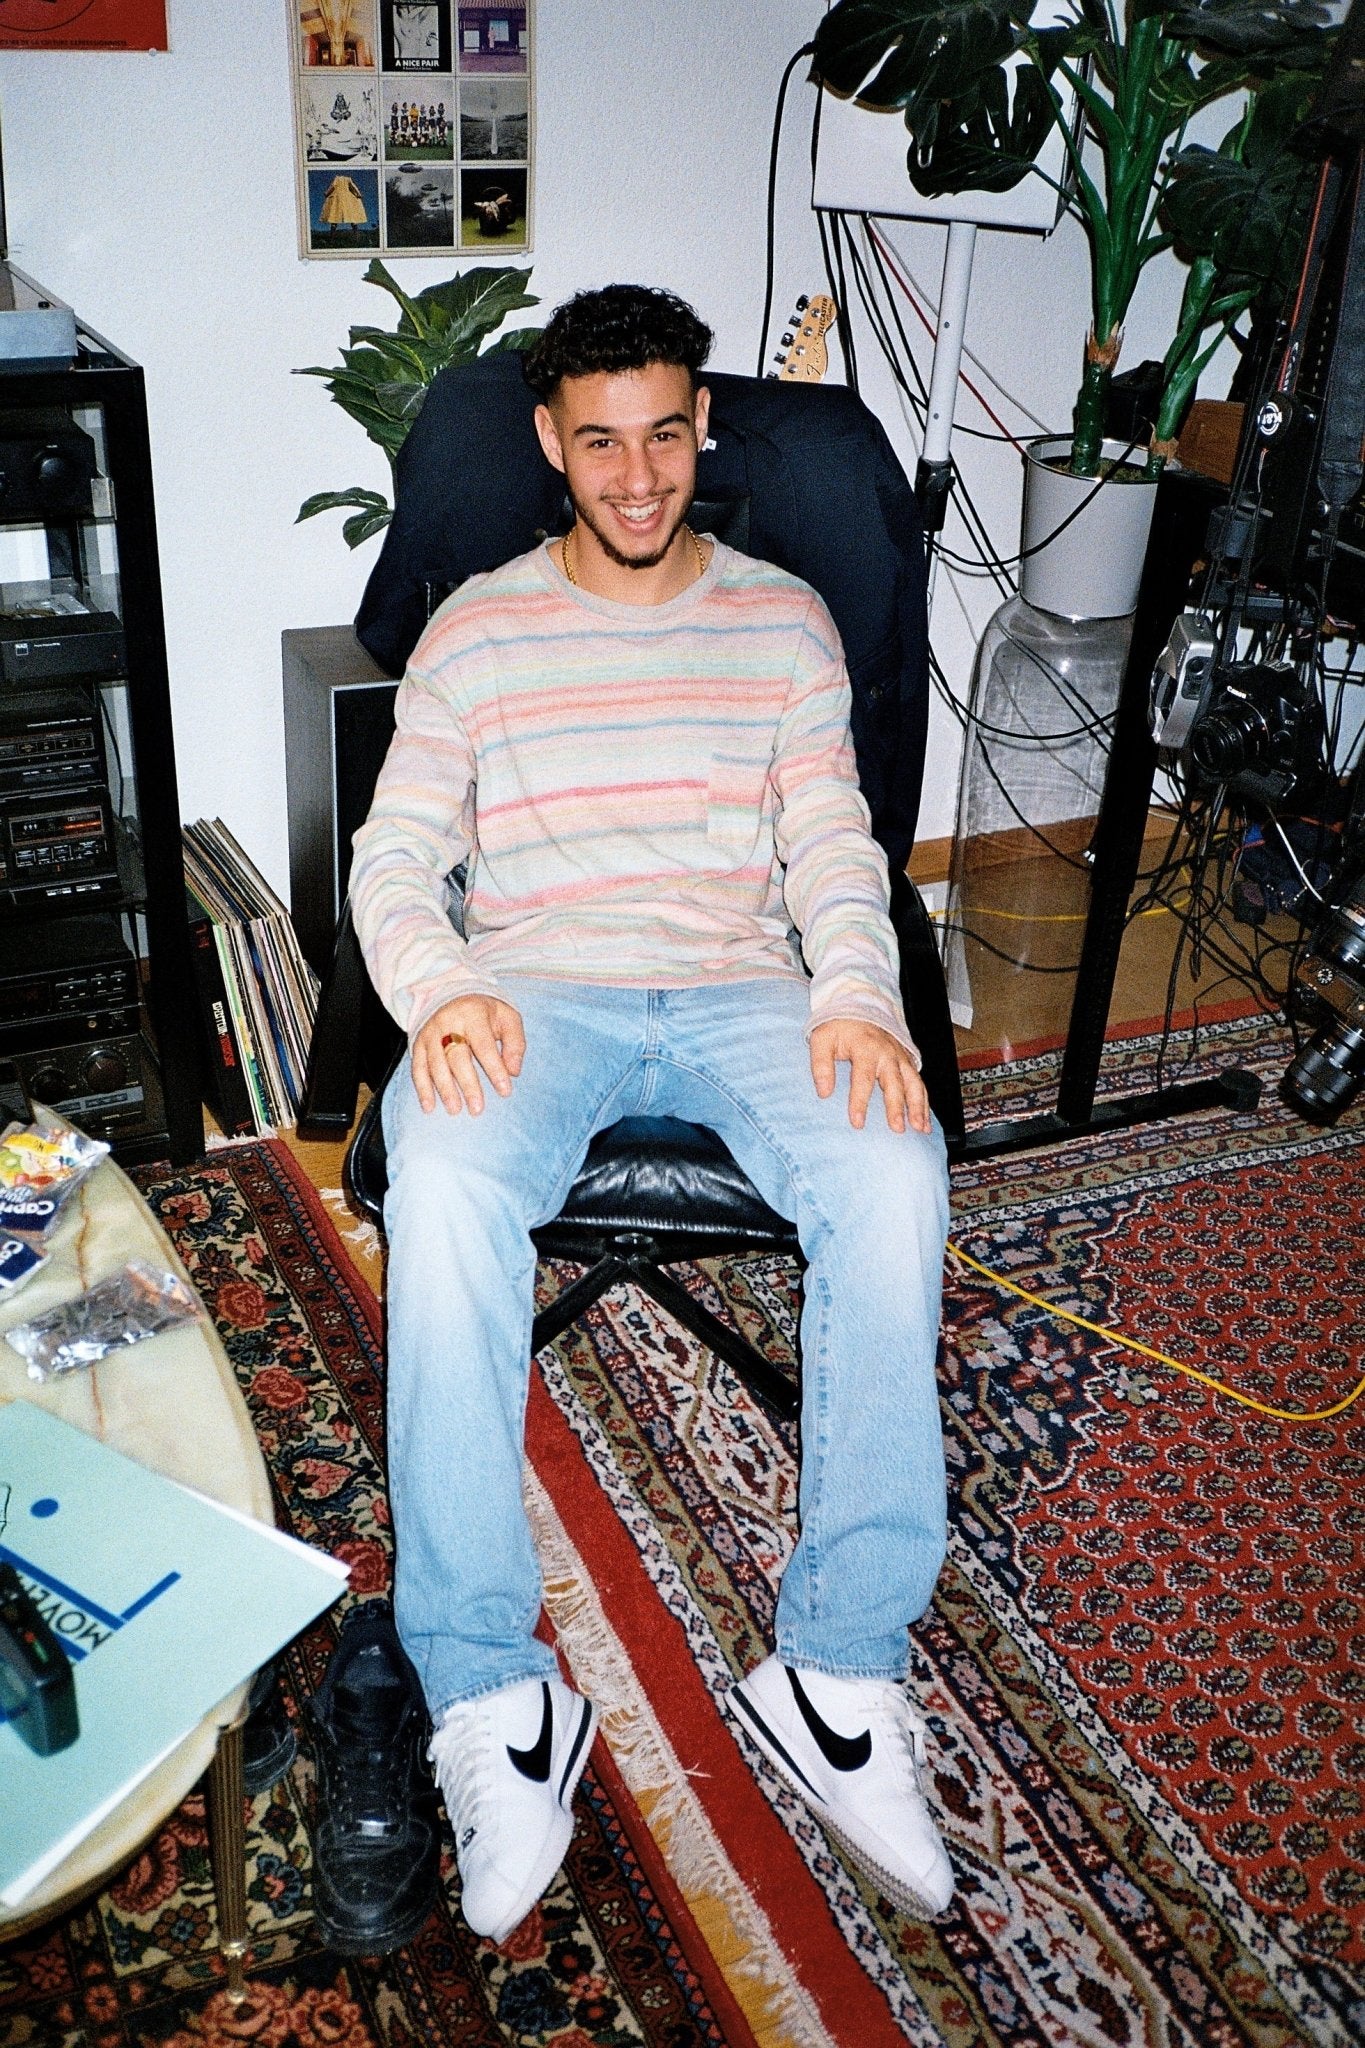 Man wearing the Rainbow Striped Long Sleeved T-Shirt  by French Brand Crest with jeans and Nike Sneakers